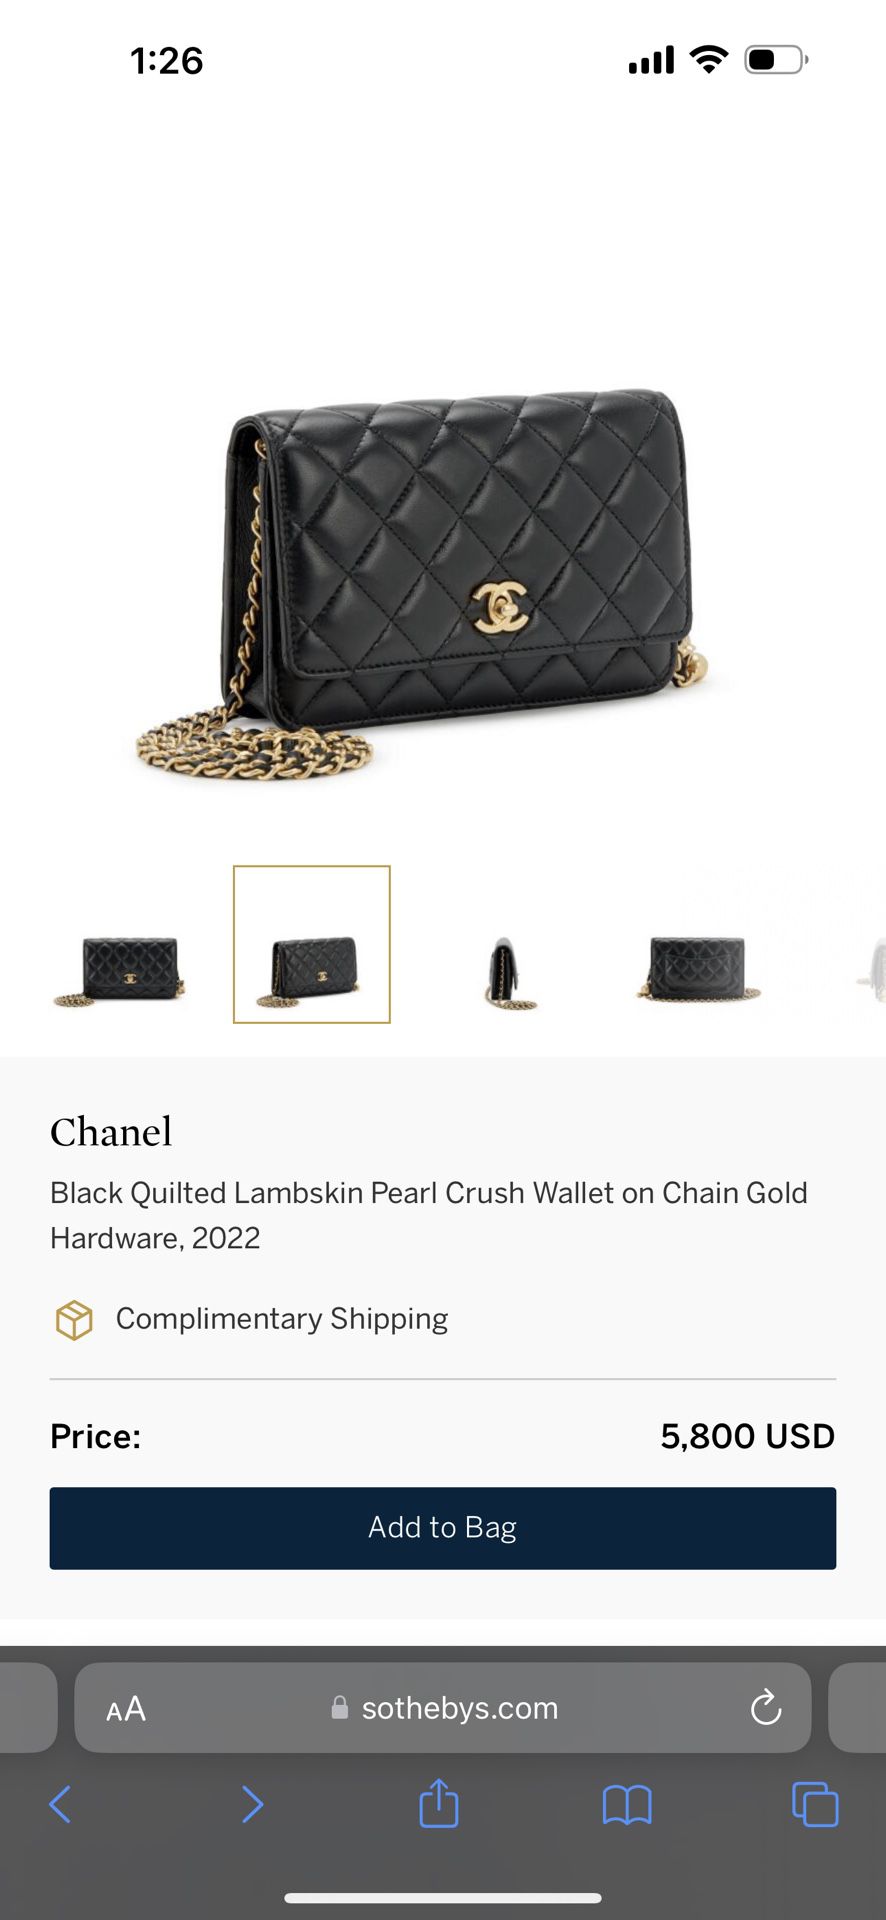 Chanel Black Quilted Lambskin Pearl Crush Wallet on Chain Gold Hardware, 2022  for Sale in Elmwood Park, NJ - OfferUp